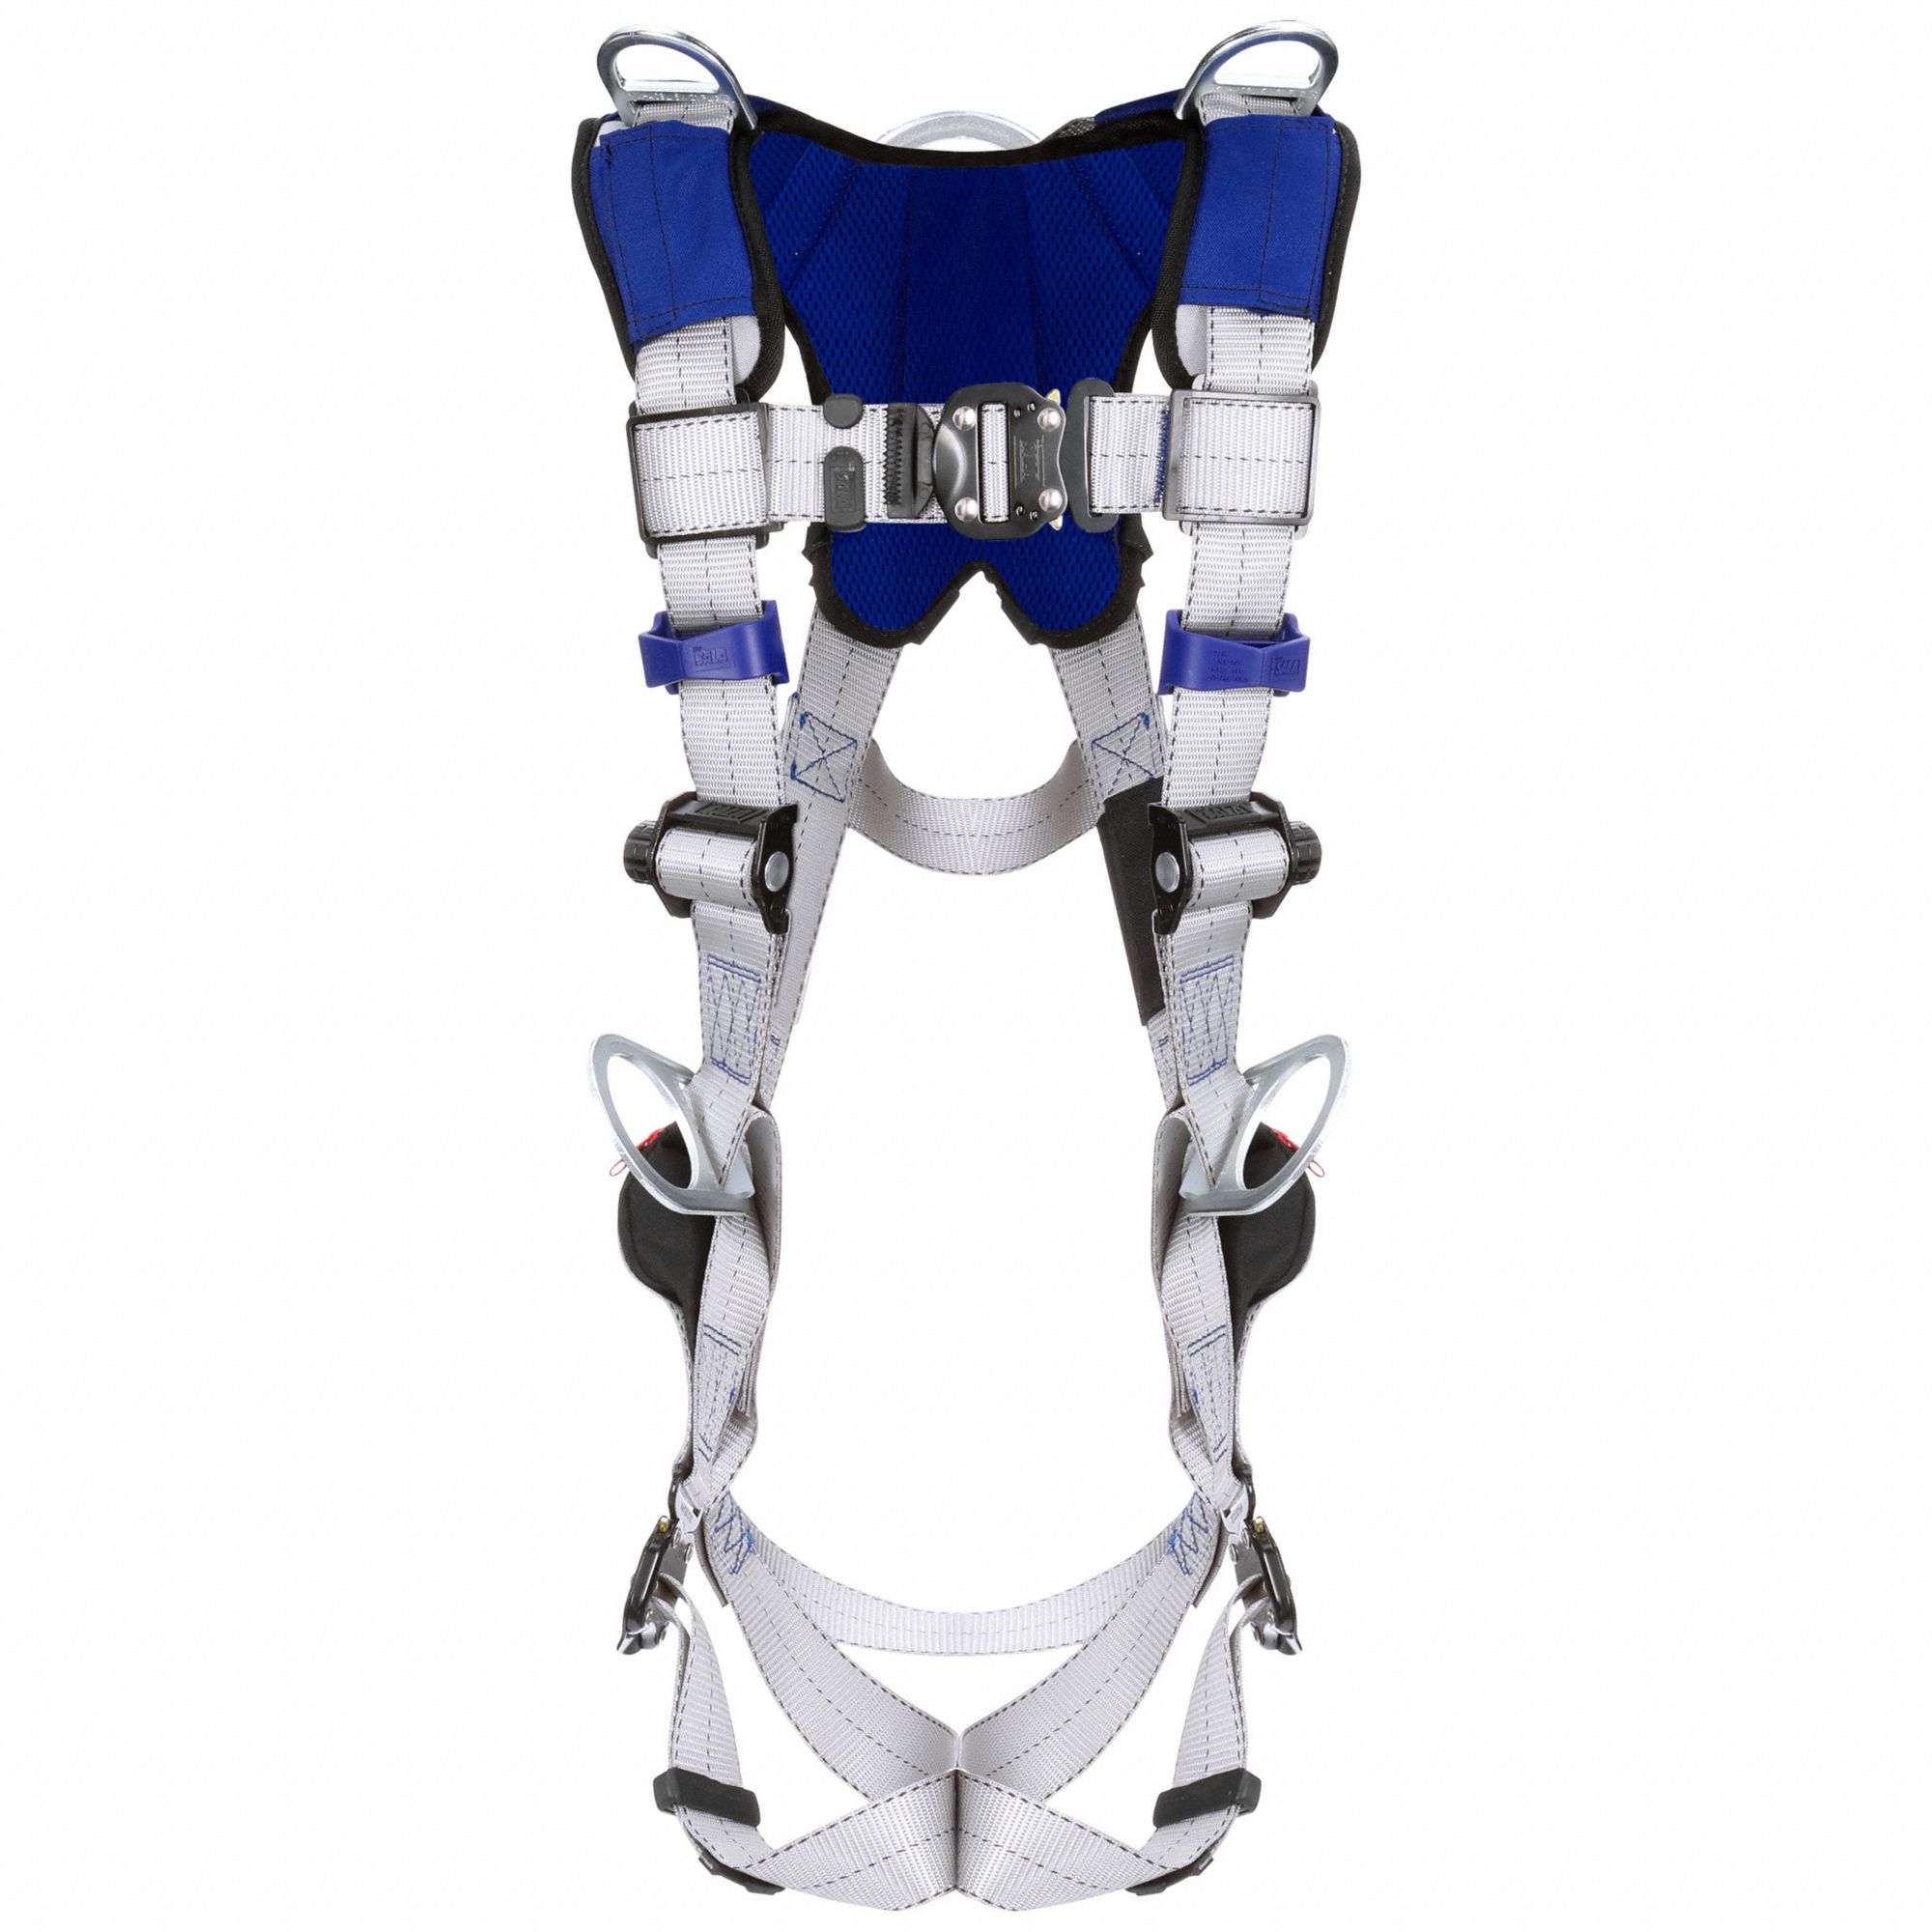 3M DBI-SALA, Positioning, Vest Harness, Fall Protection Harness ...